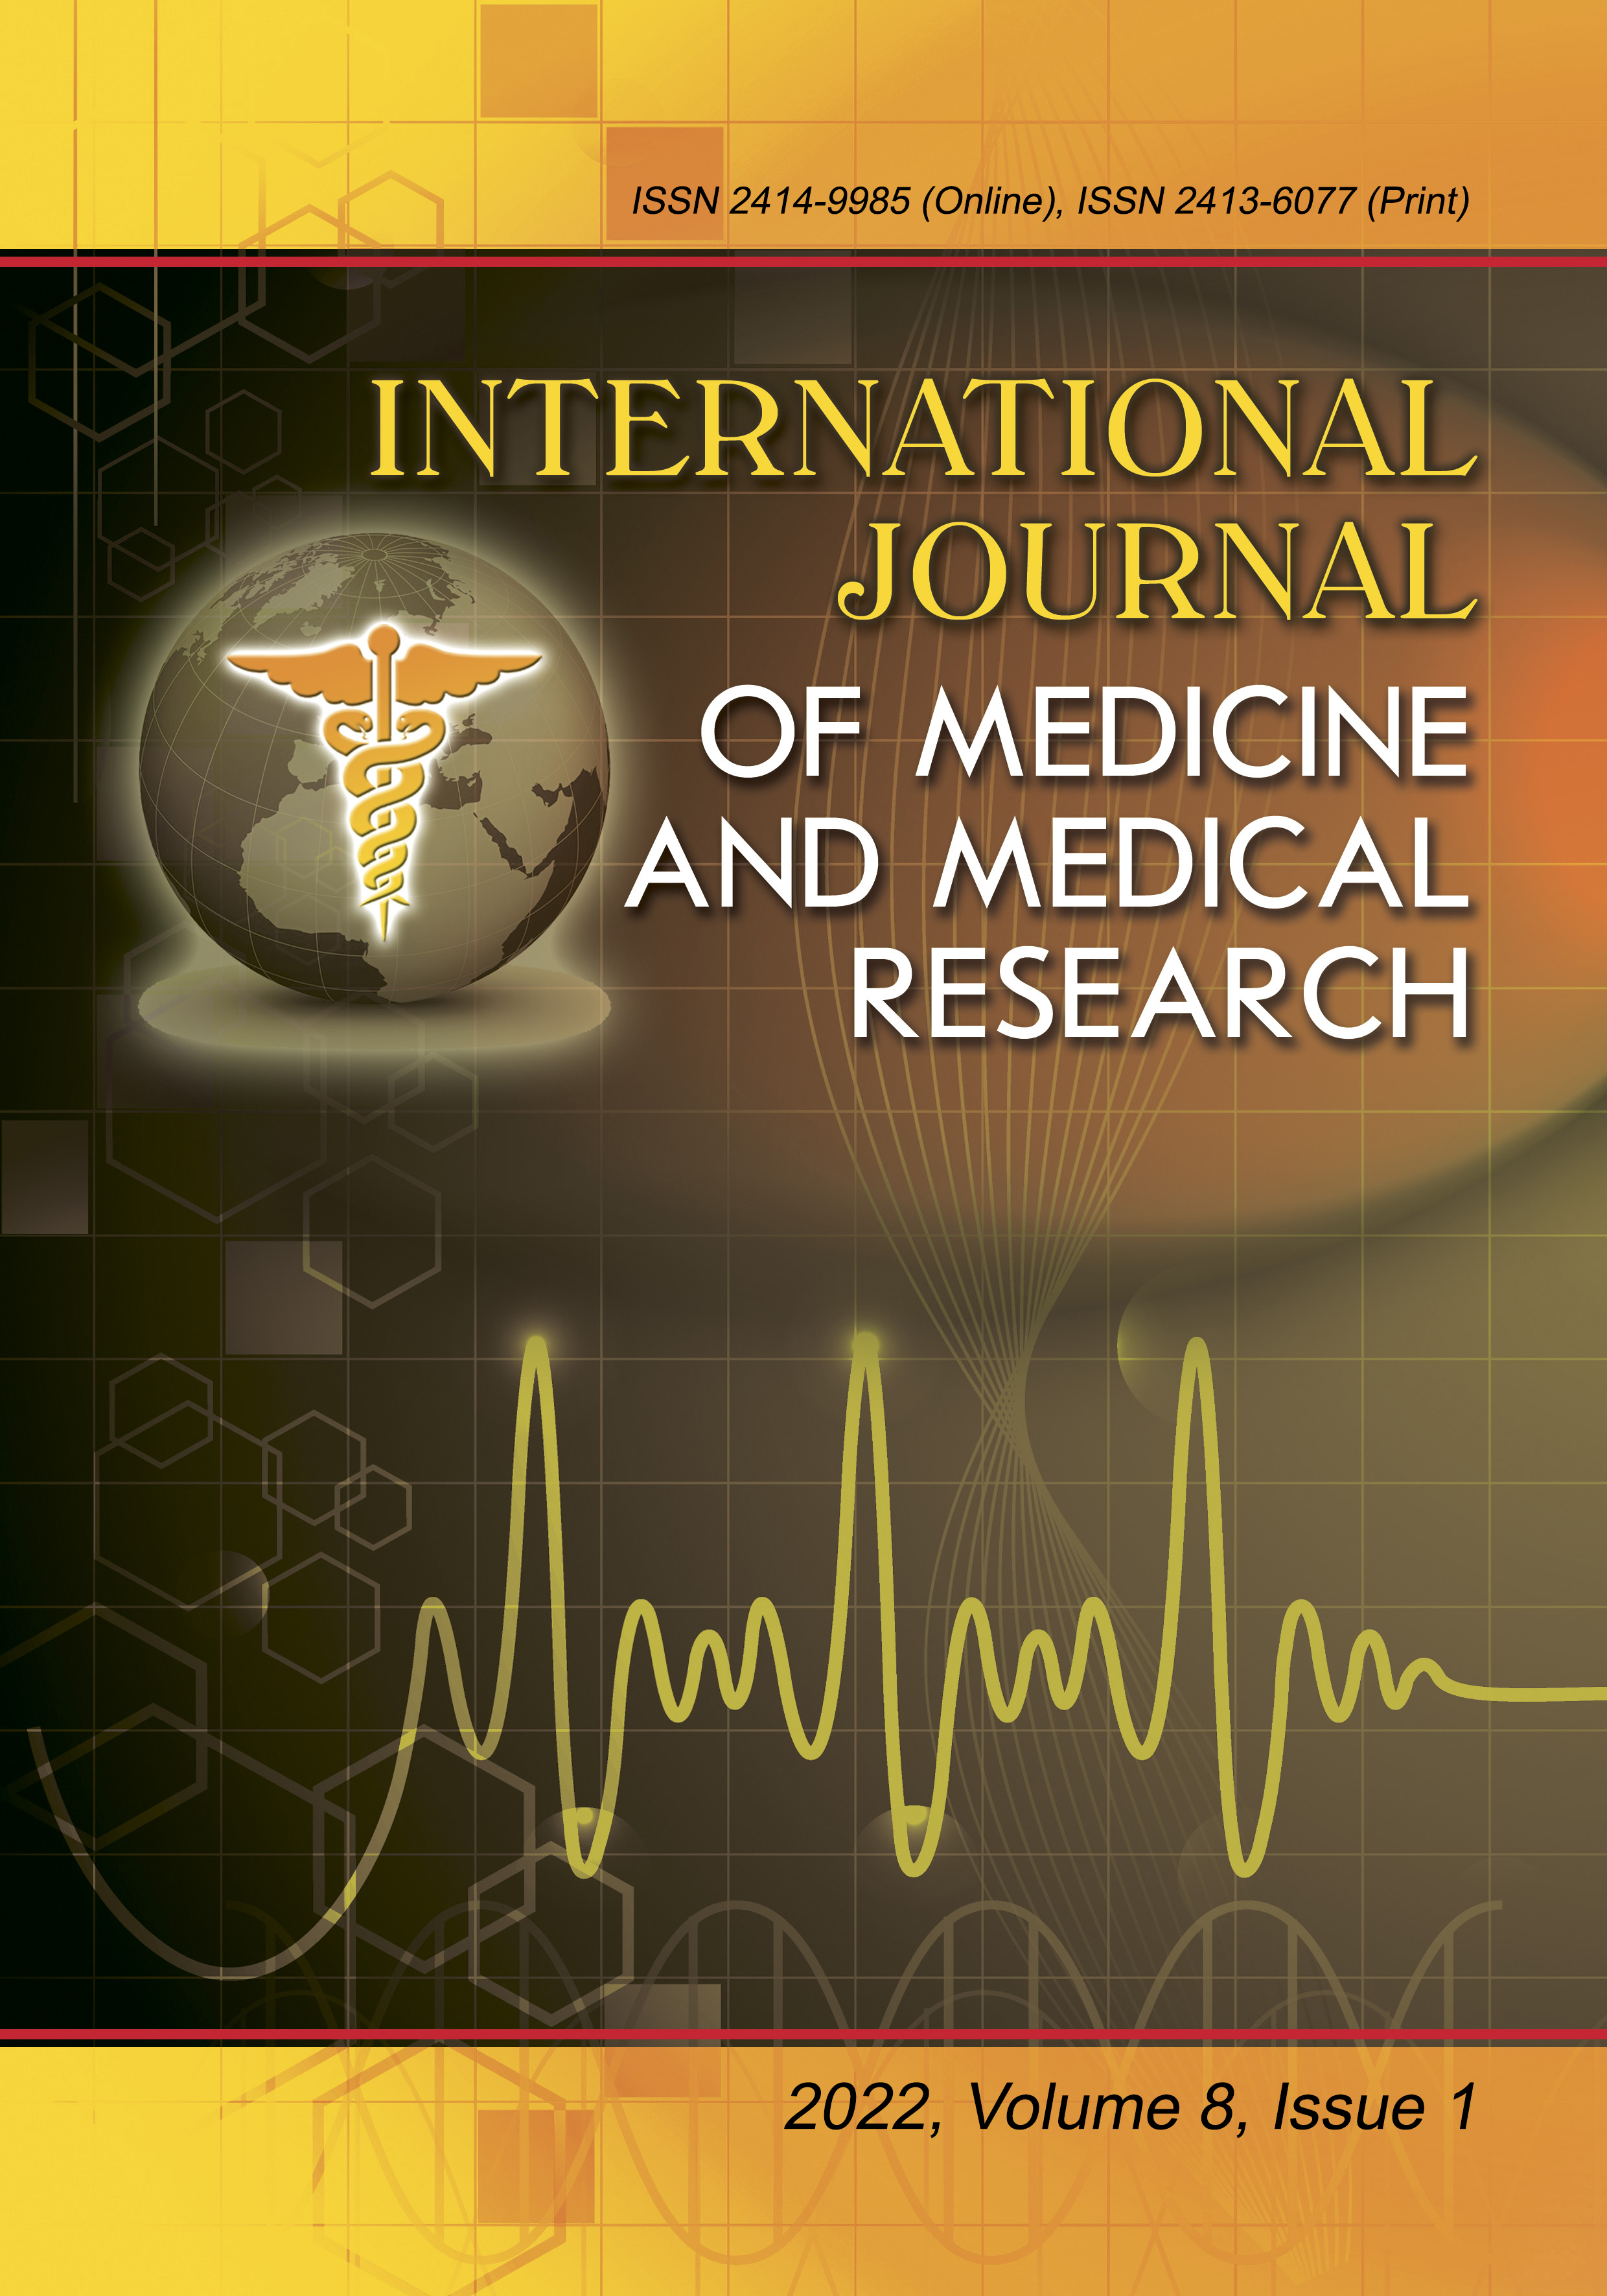 					View Vol. 8 No. 1 (2022): International Journal of Medicine and Medical Research
				